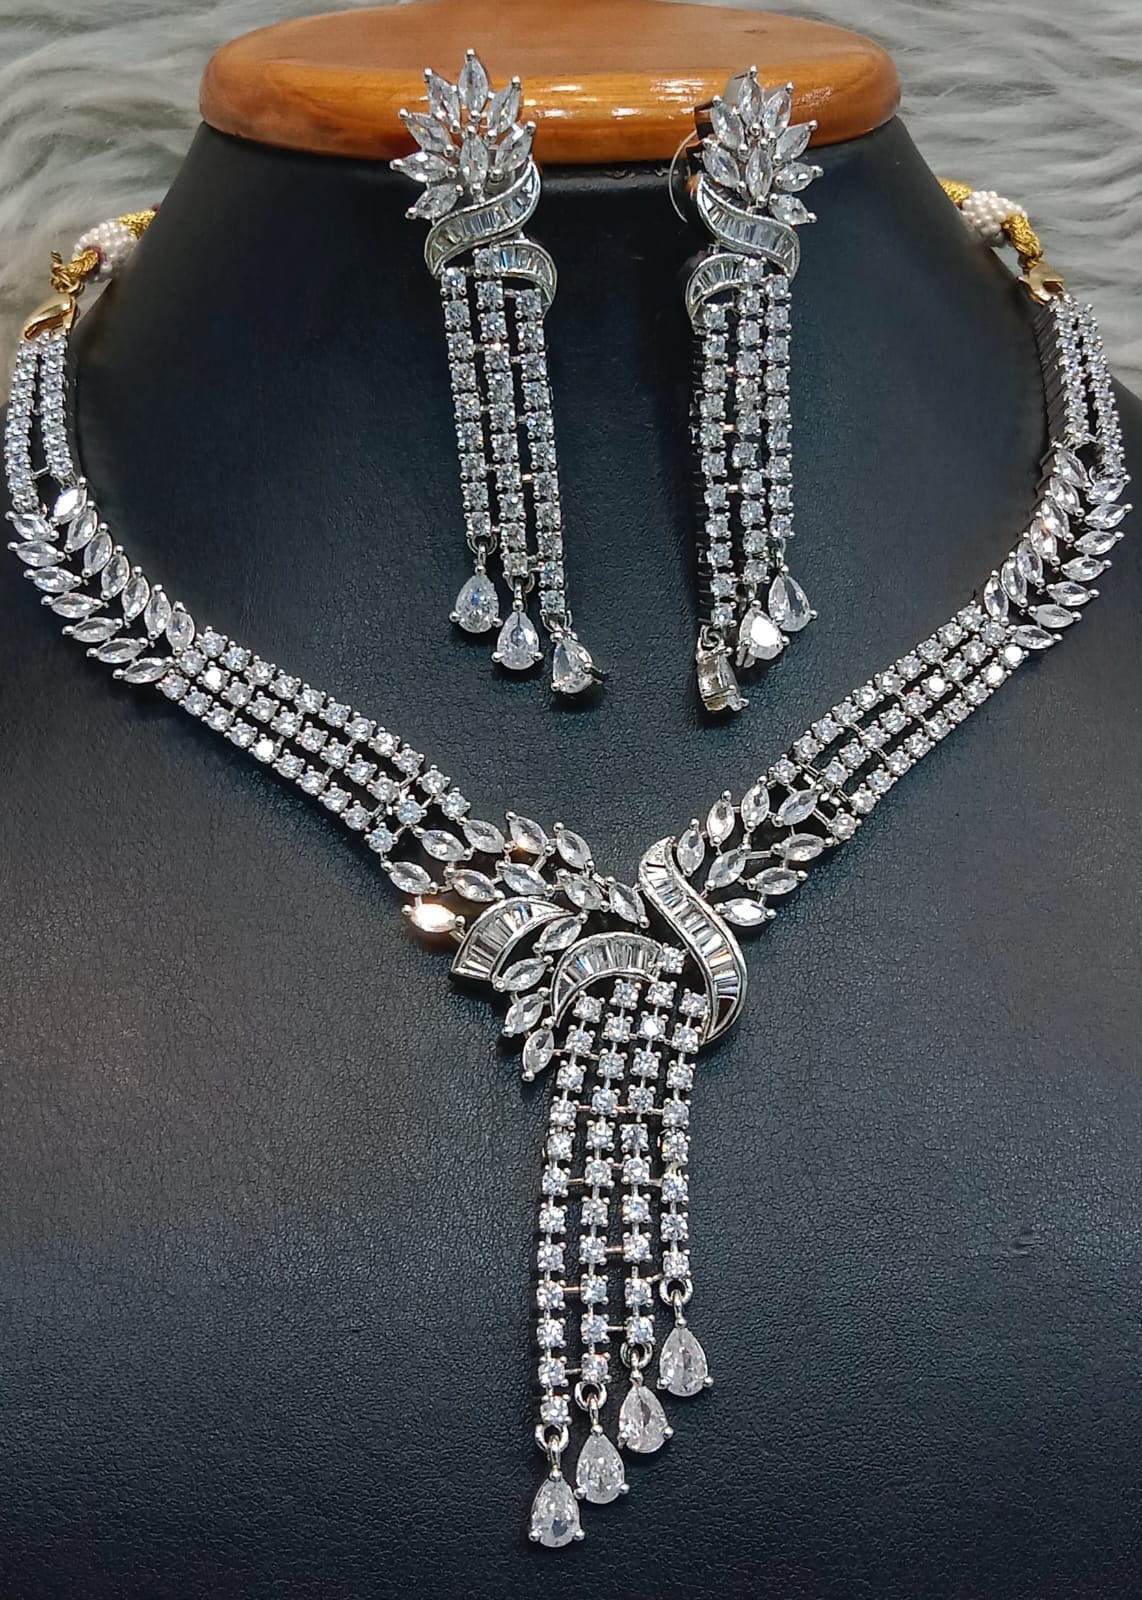 Beautiful American Diamond Necklace Set with Earrings- RoseGold, Gold and Silver Polish